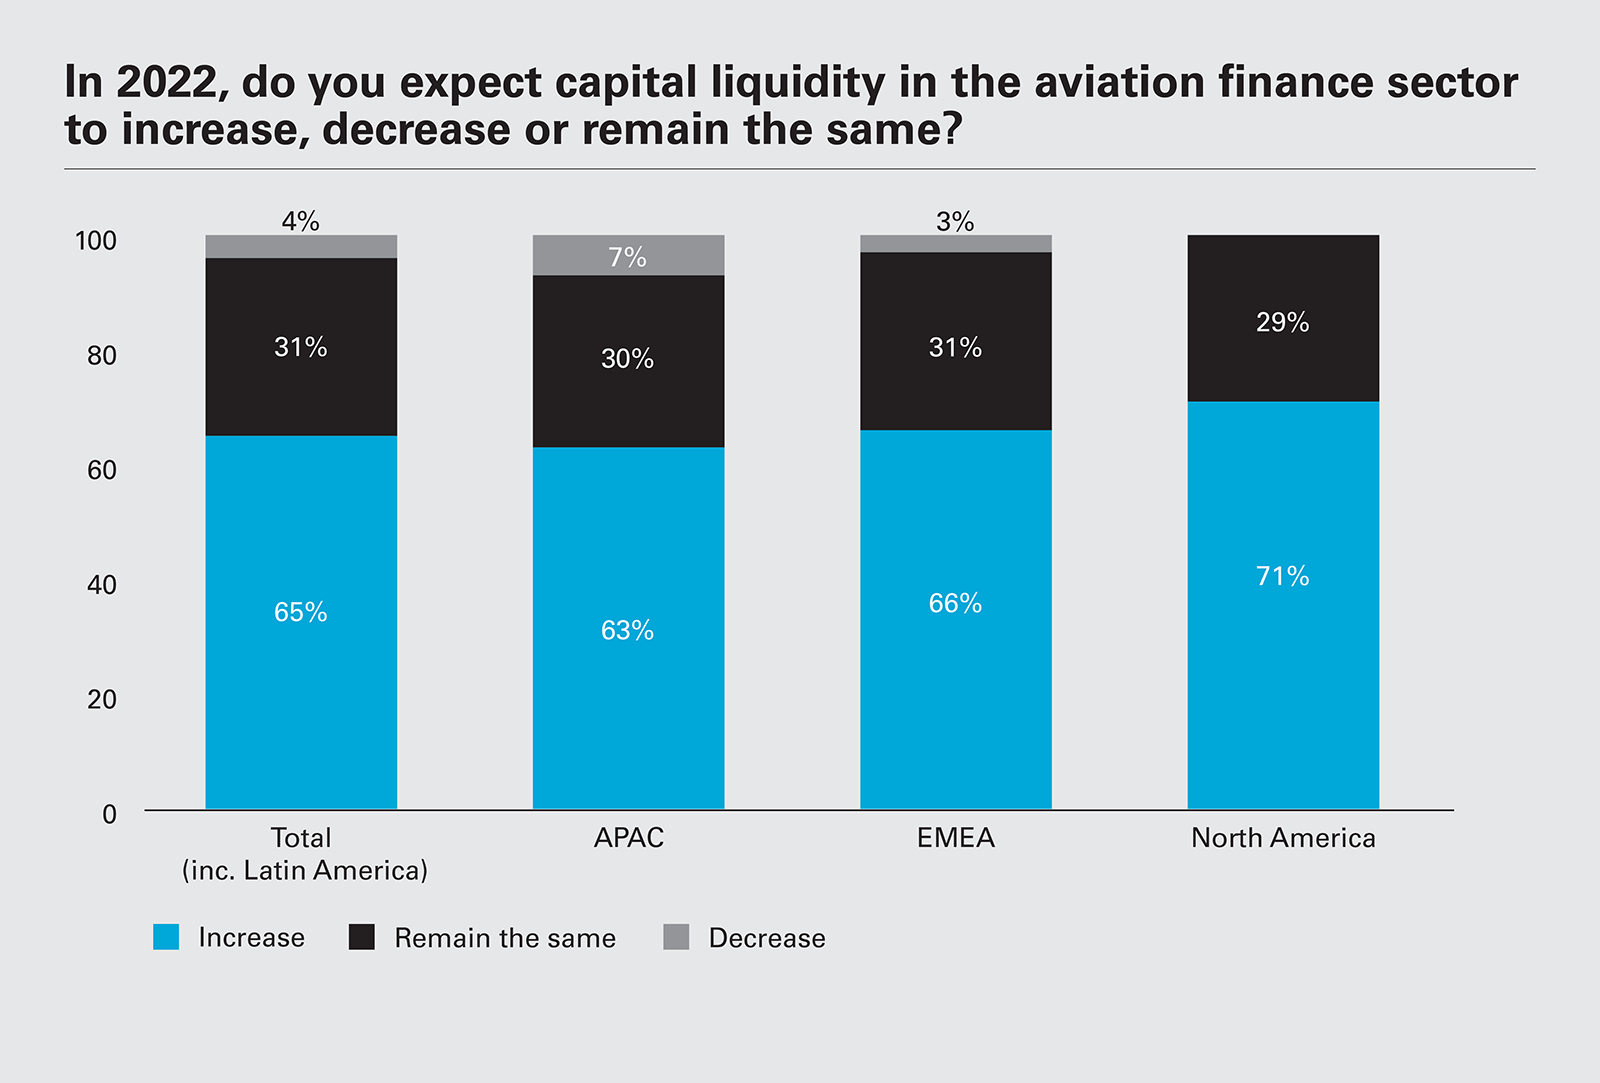 In 2022, do you expect capital liquidity in the aviation finance sector to increase, decrease or remain the same?